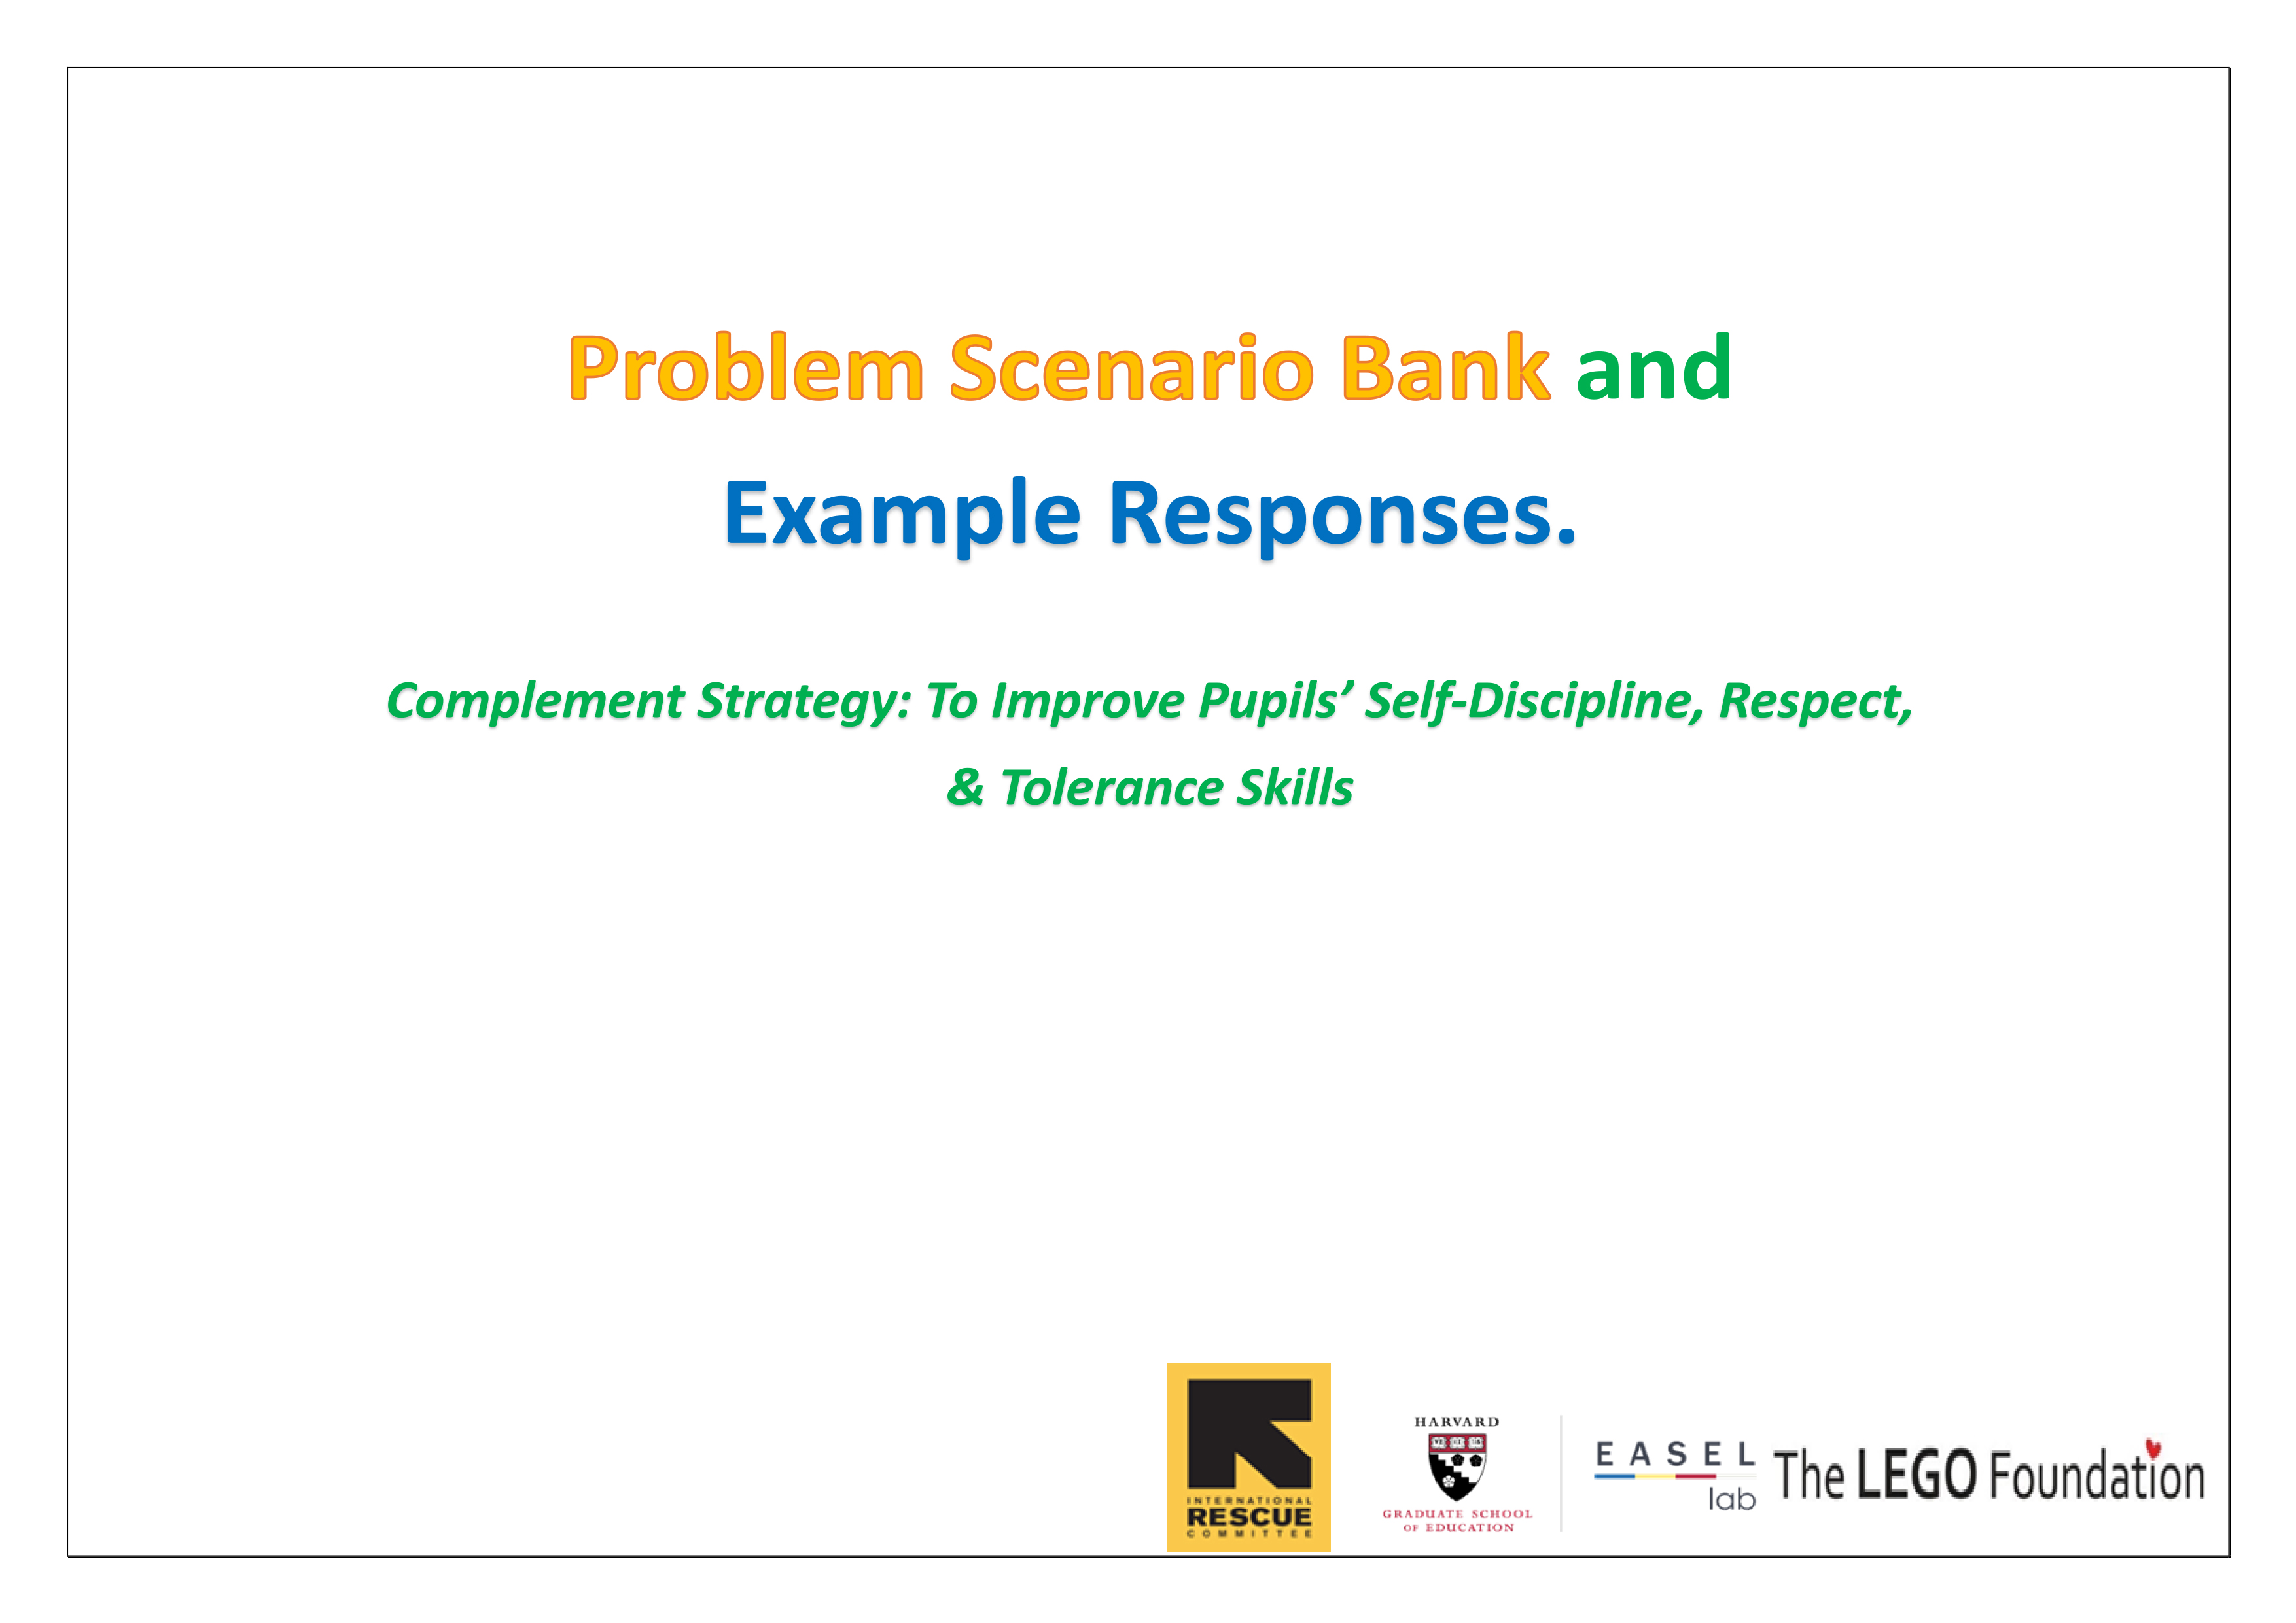 Problem Scenario Bank and Example Question Responses